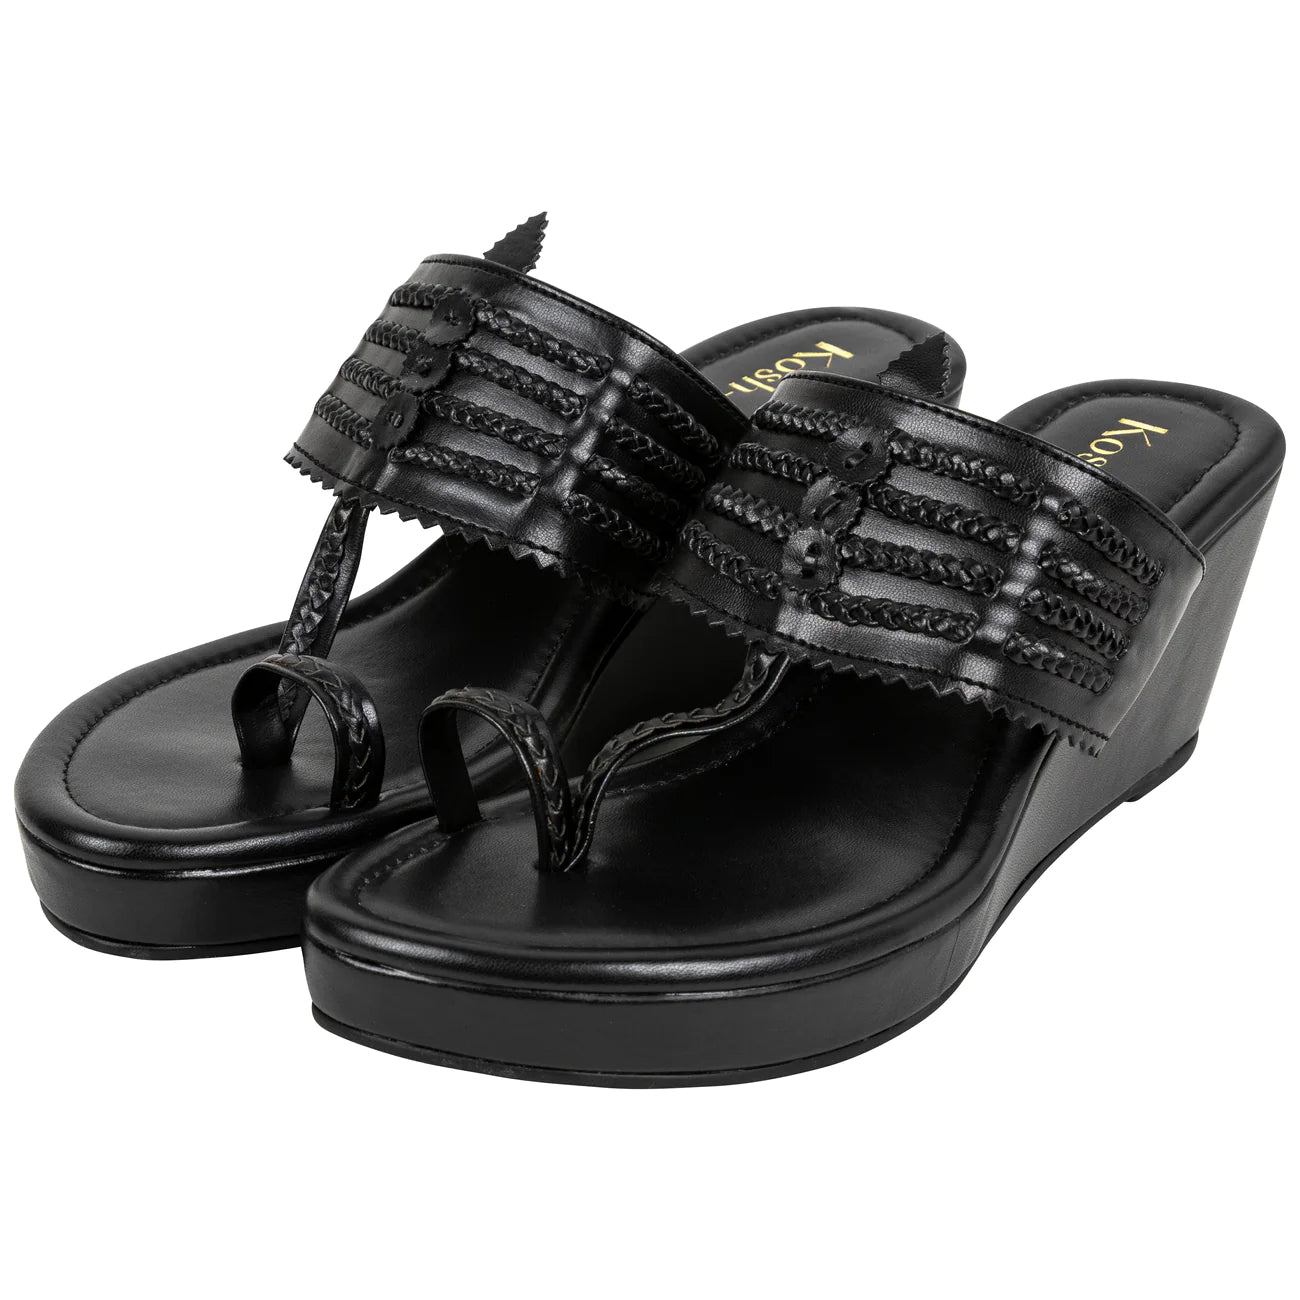 black wedge sandals for women in usa by kosh-a